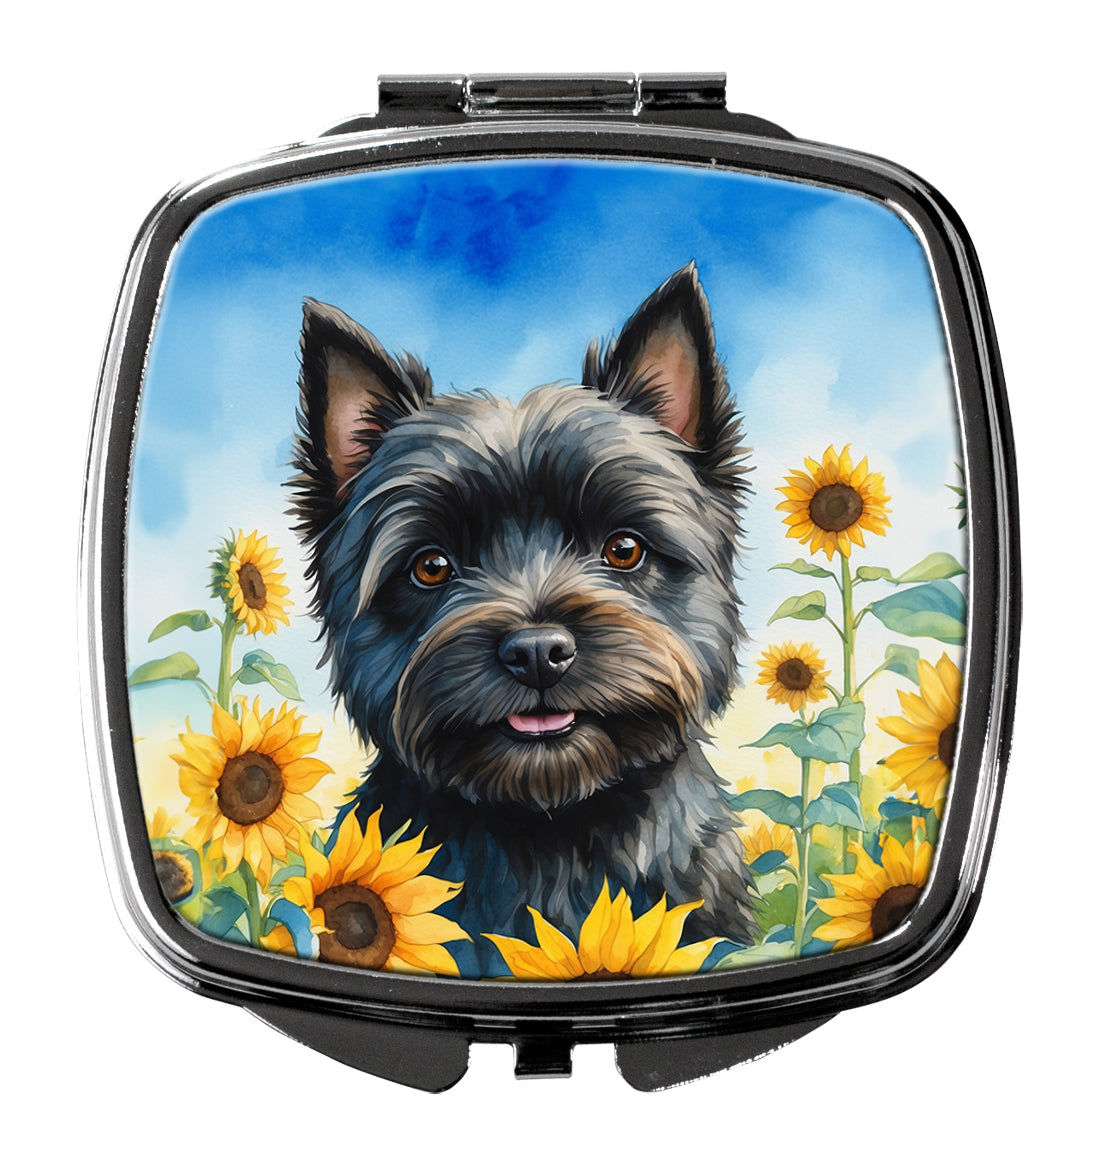 Buy this Cairn Terrier in Sunflowers Compact Mirror